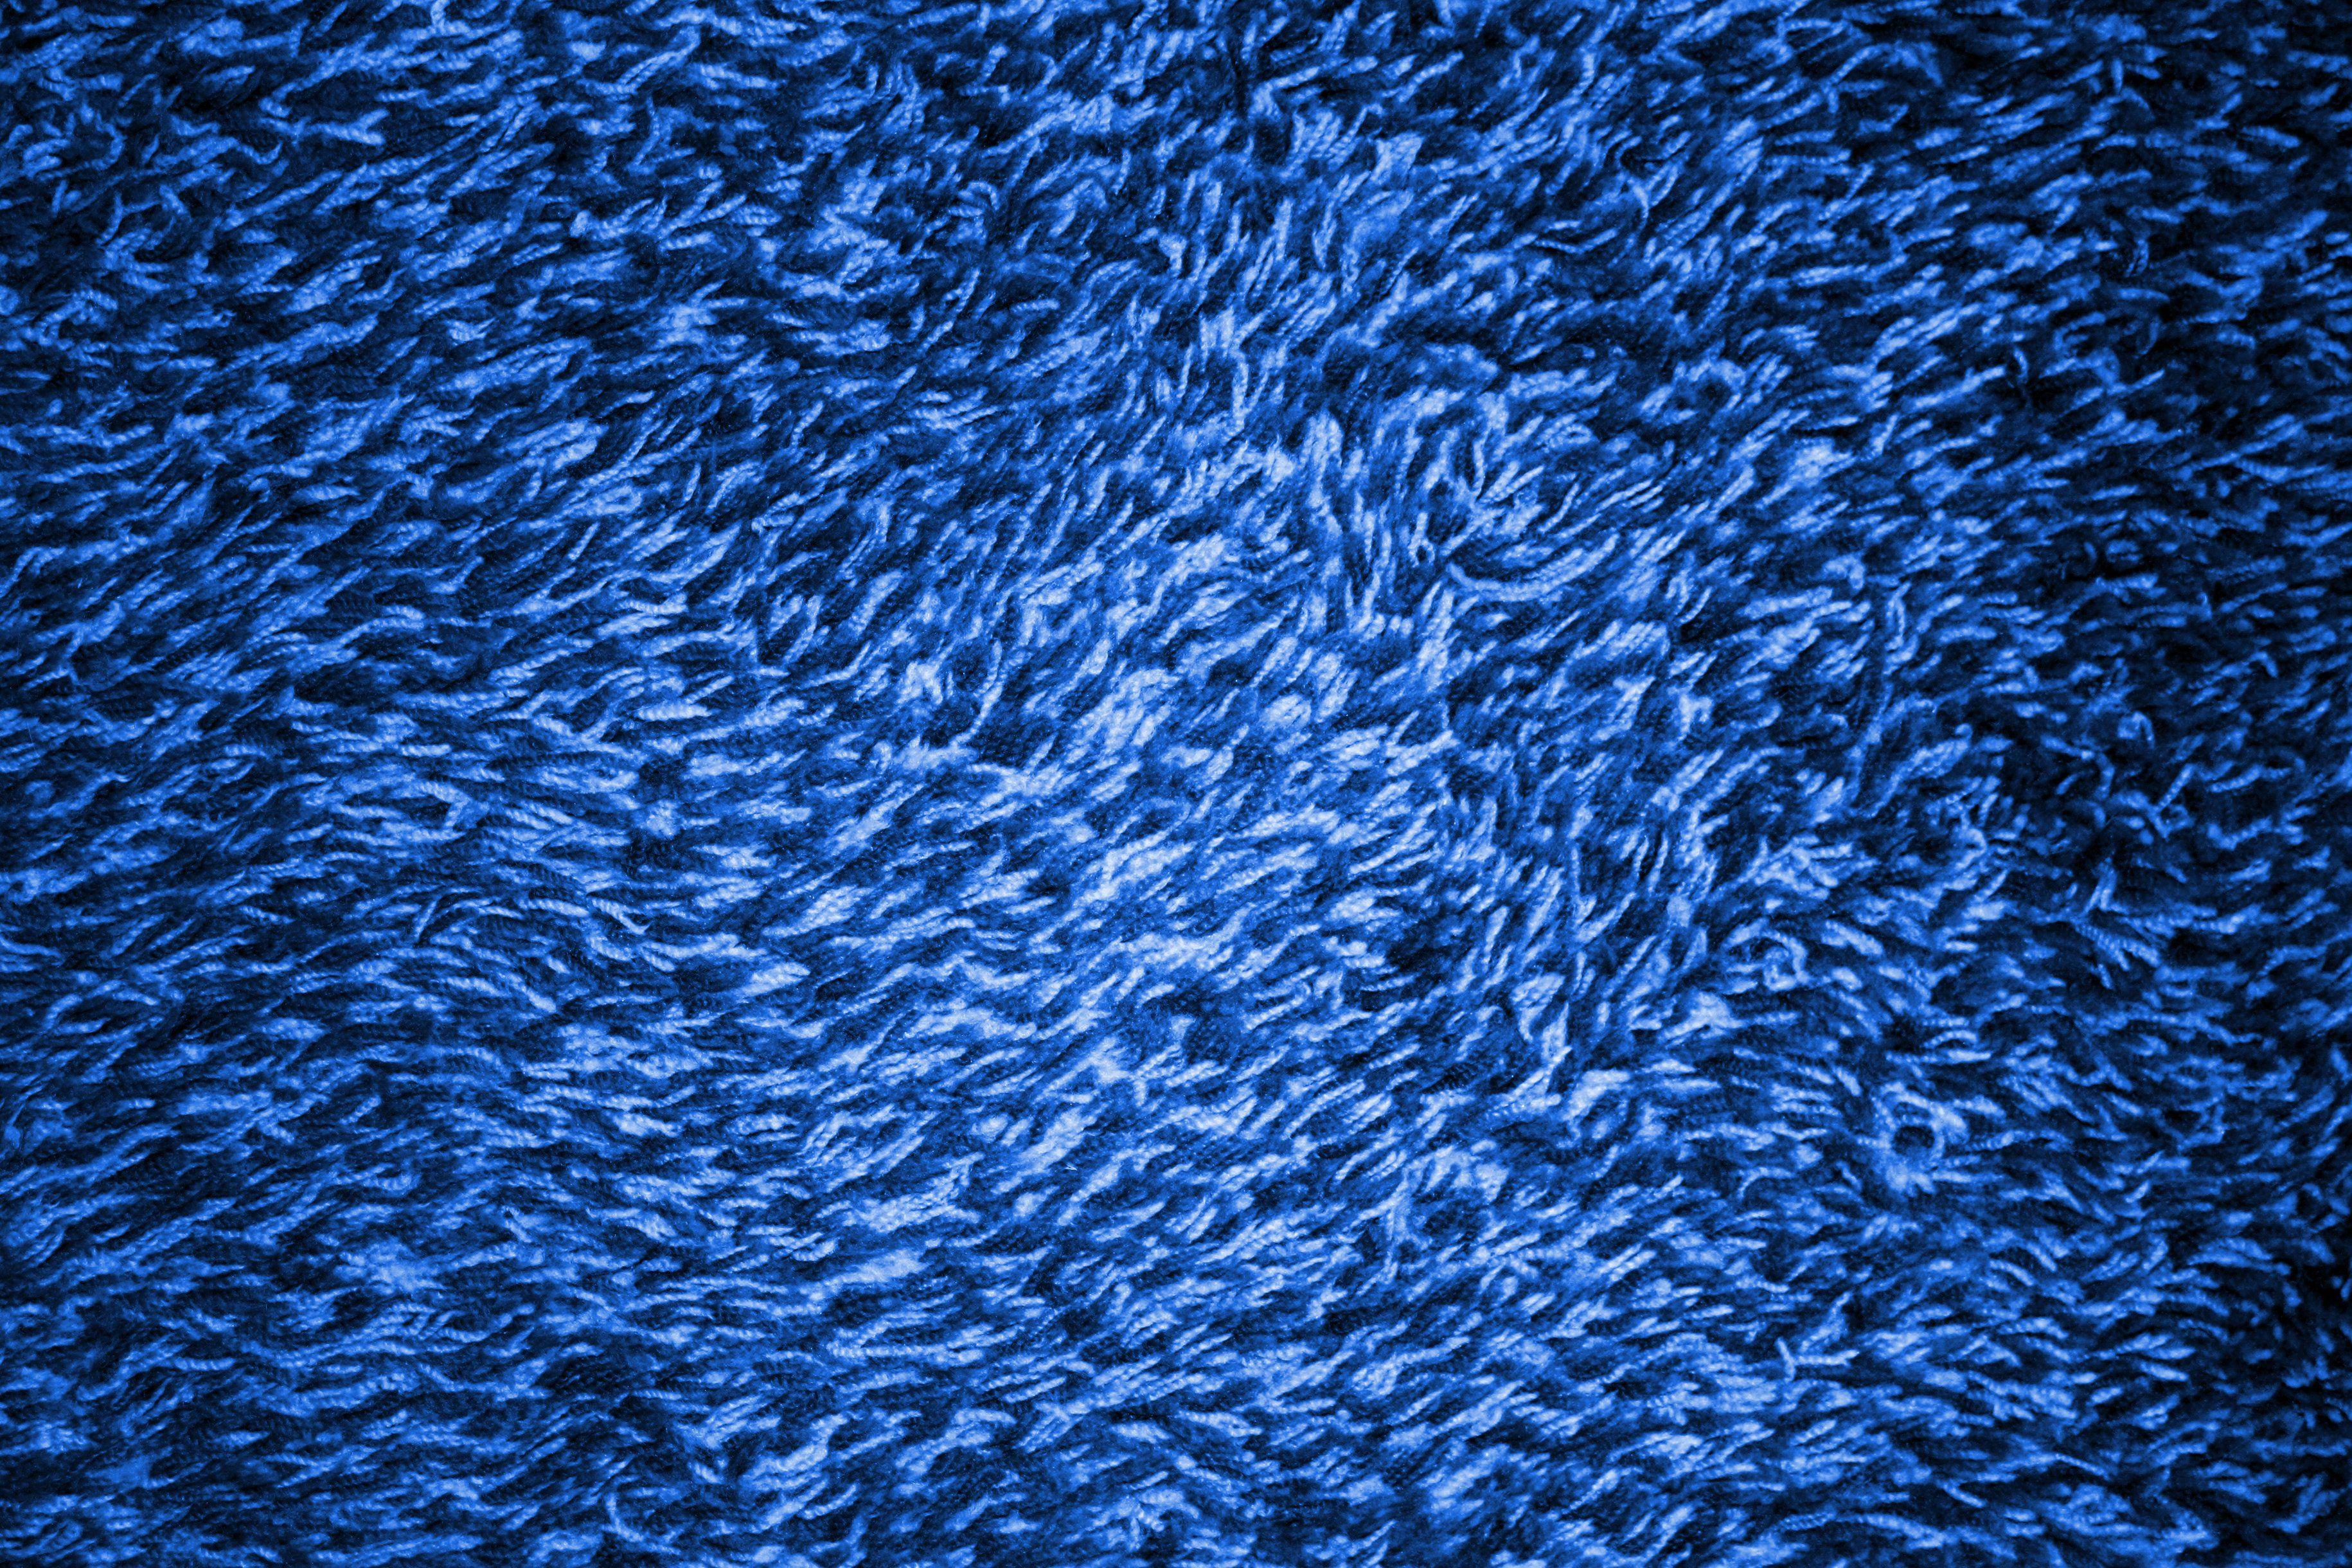 Royal Blue Shag Carpeting Texture Picture. Free Photograph